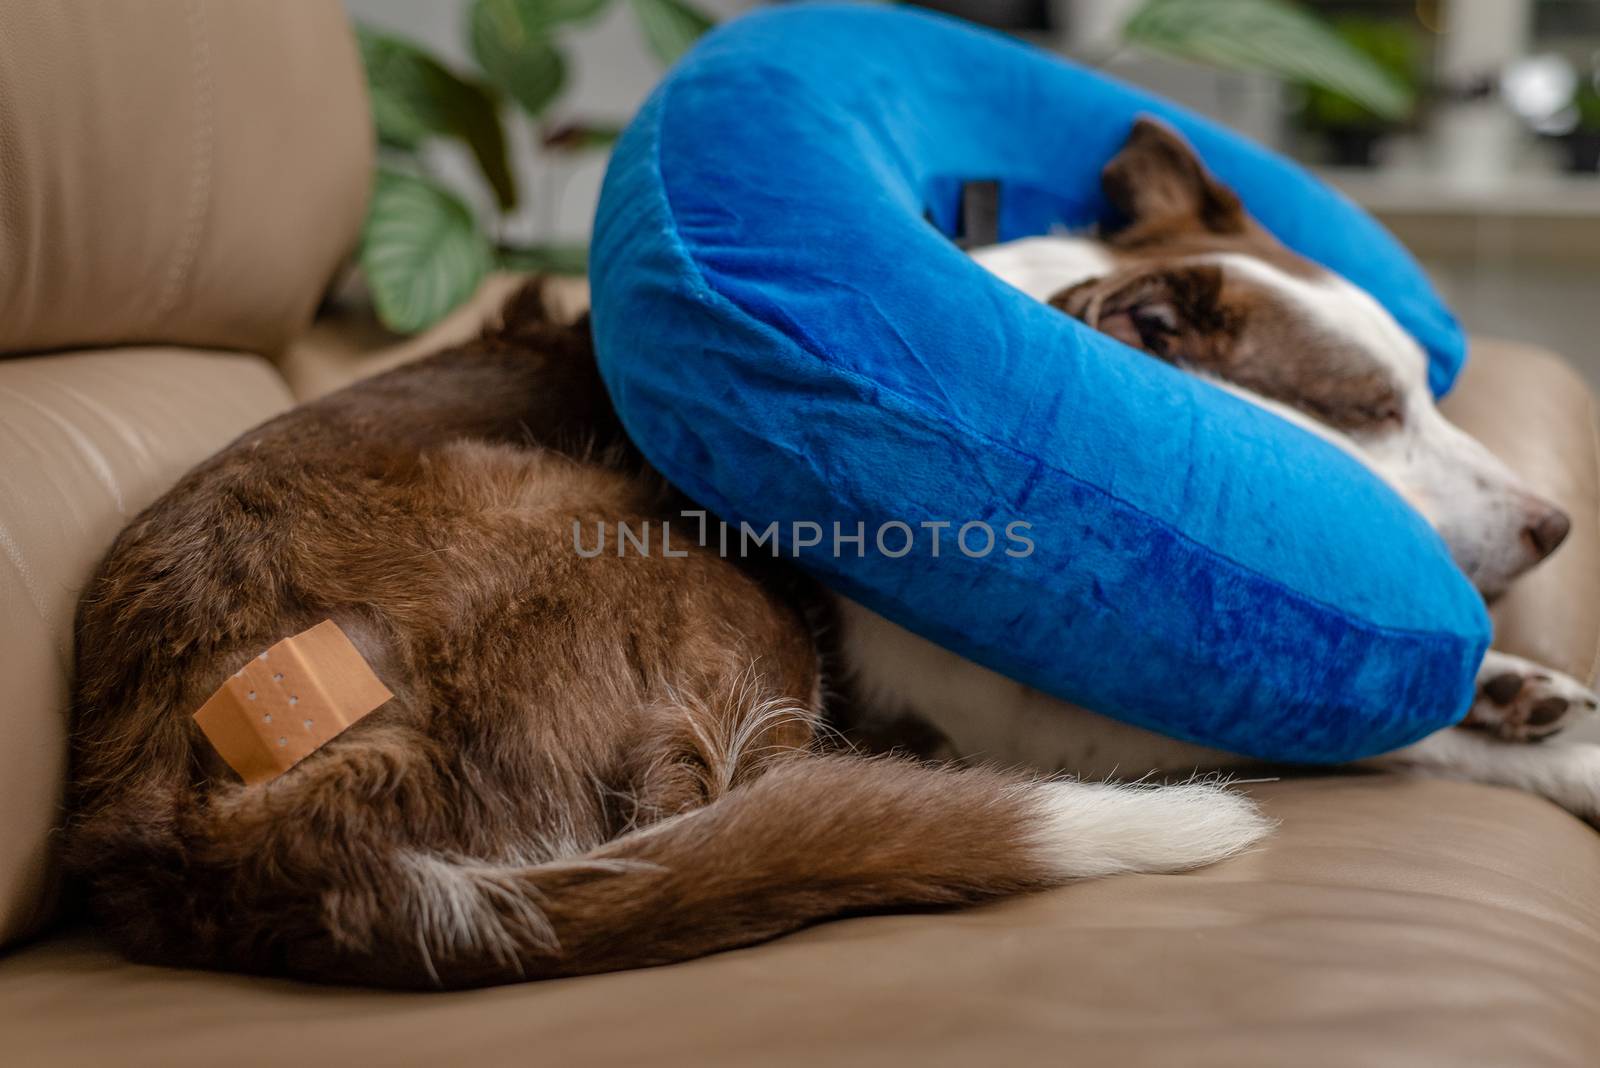 Cute Border Collie dog on a couch, wearing blue inflatable collar by Pendleton